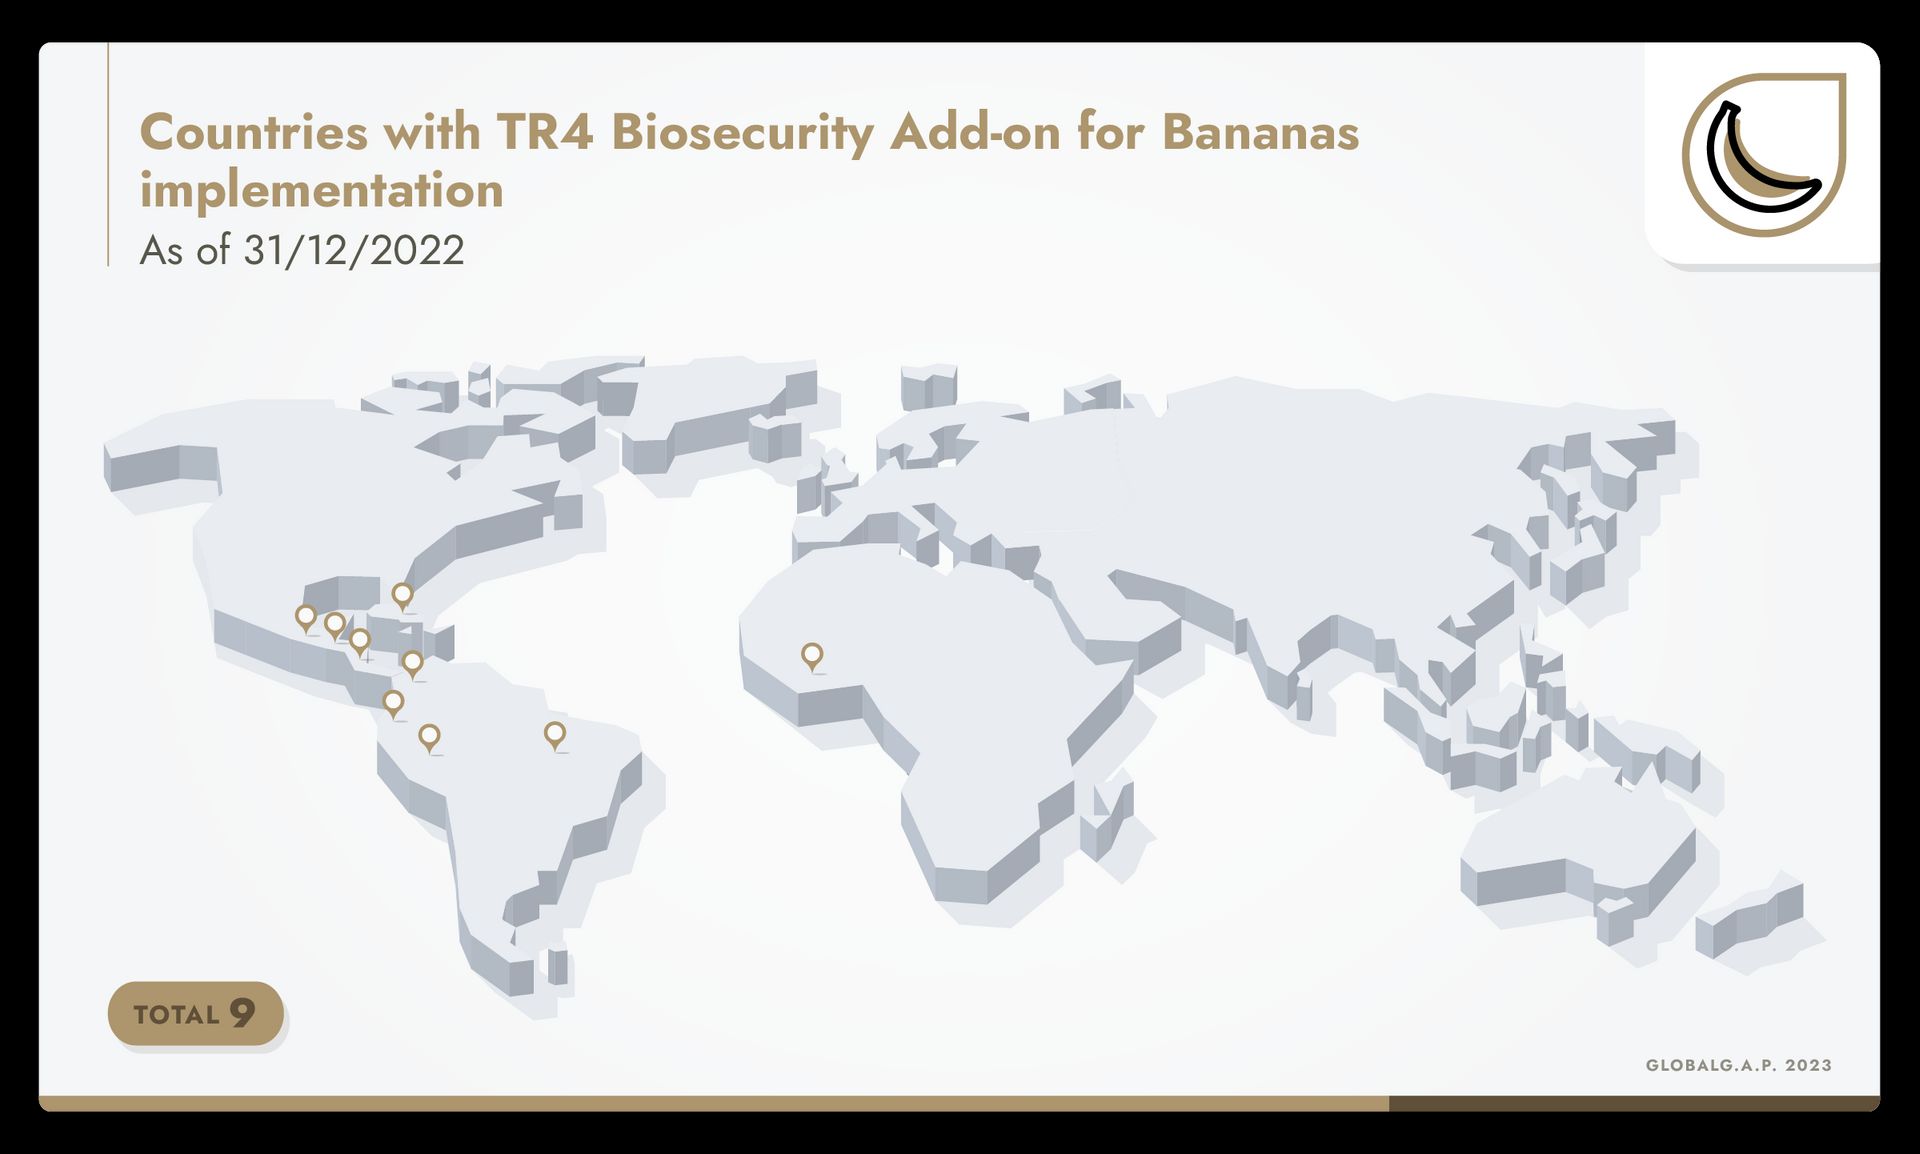 Infographic of a world map showing countries with TR4 Biosecurity Add-on implementation